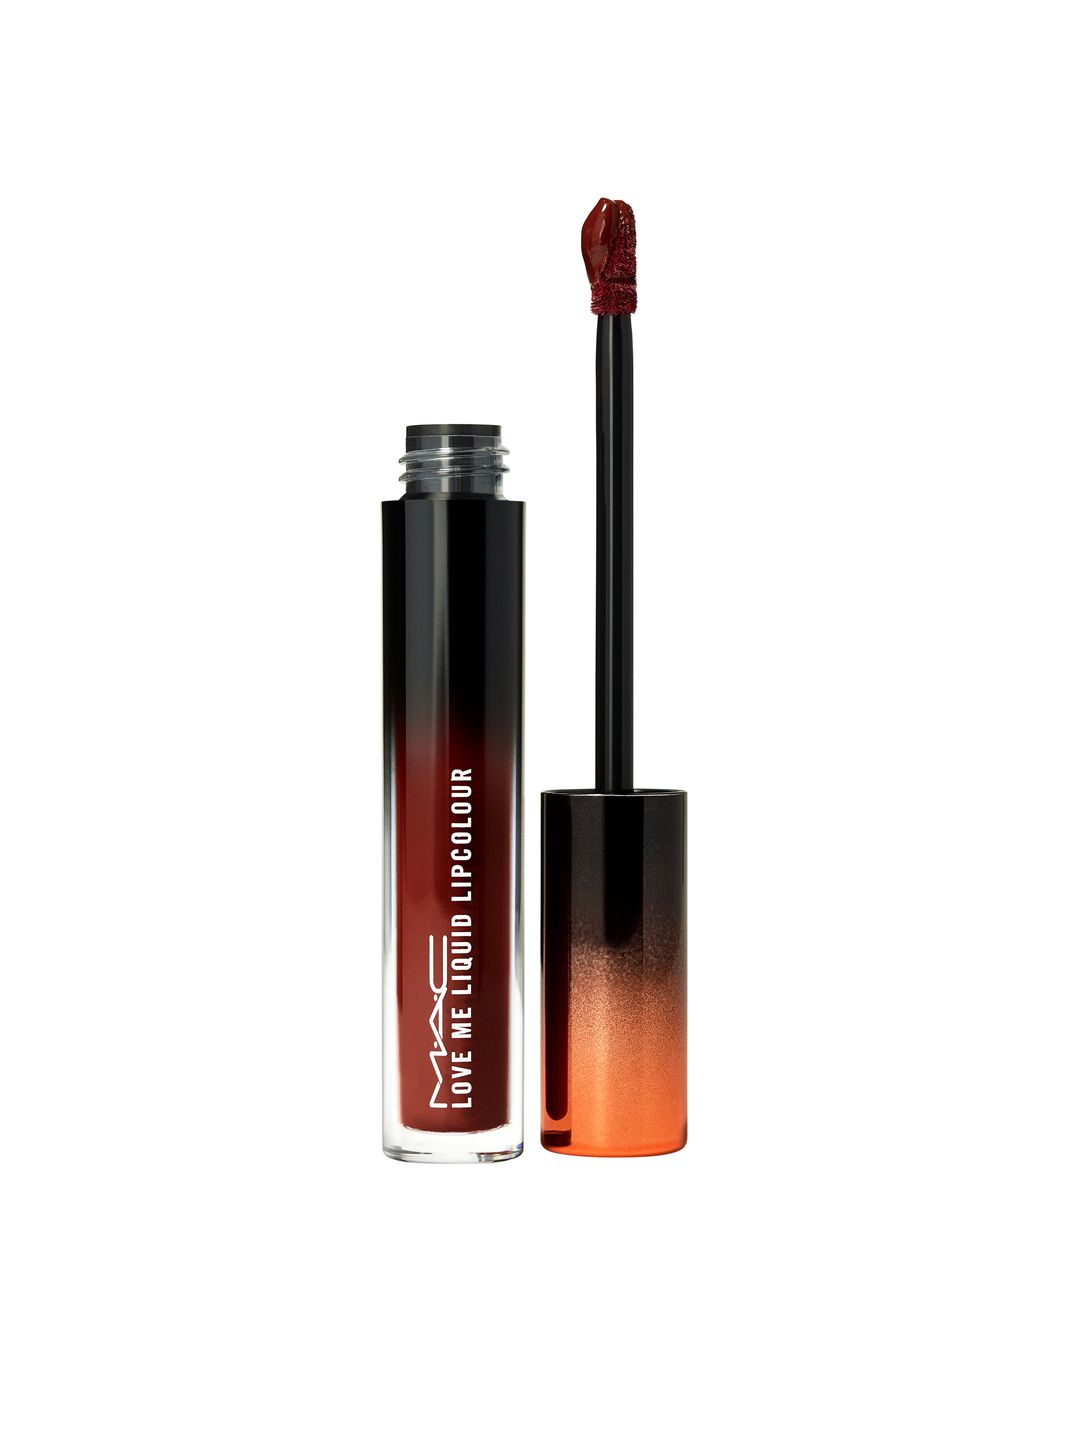 M.A.C Love Me Liquid Lipcolour - What I Say Goes Price in India